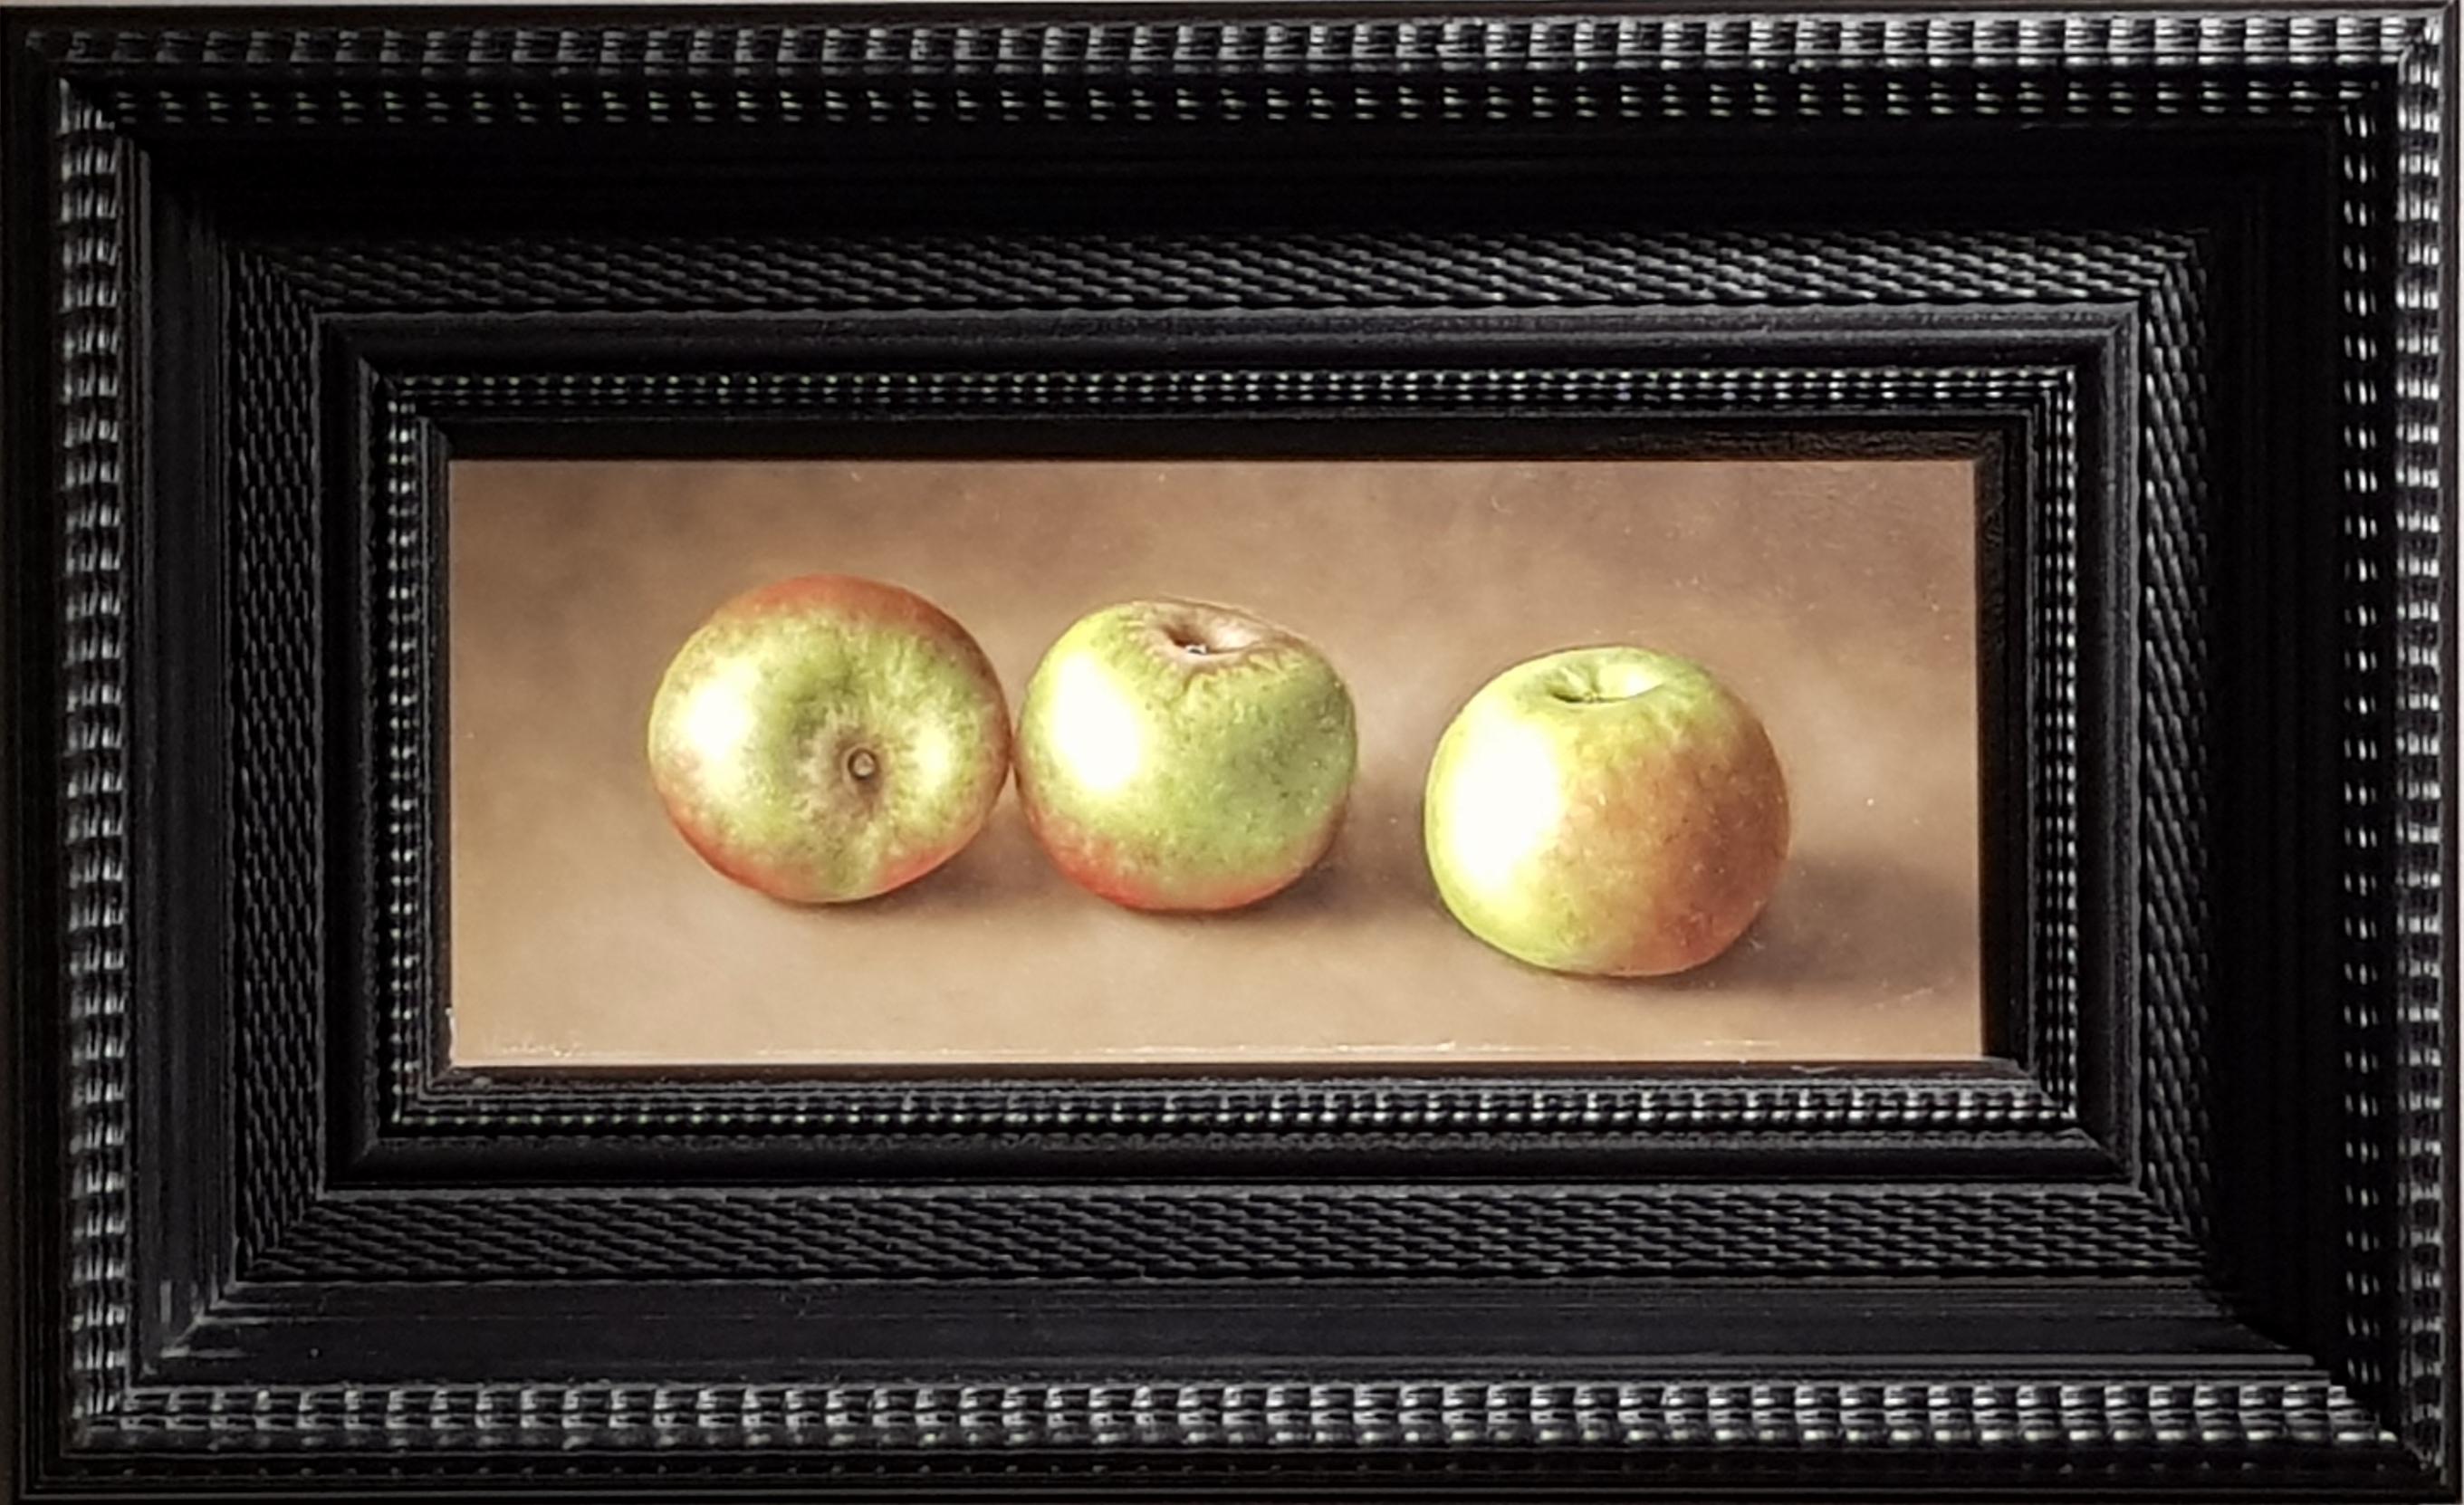 Realist Contemporary Still-Life Painting 'Trio of Apples' by Barbara Vanhove 1